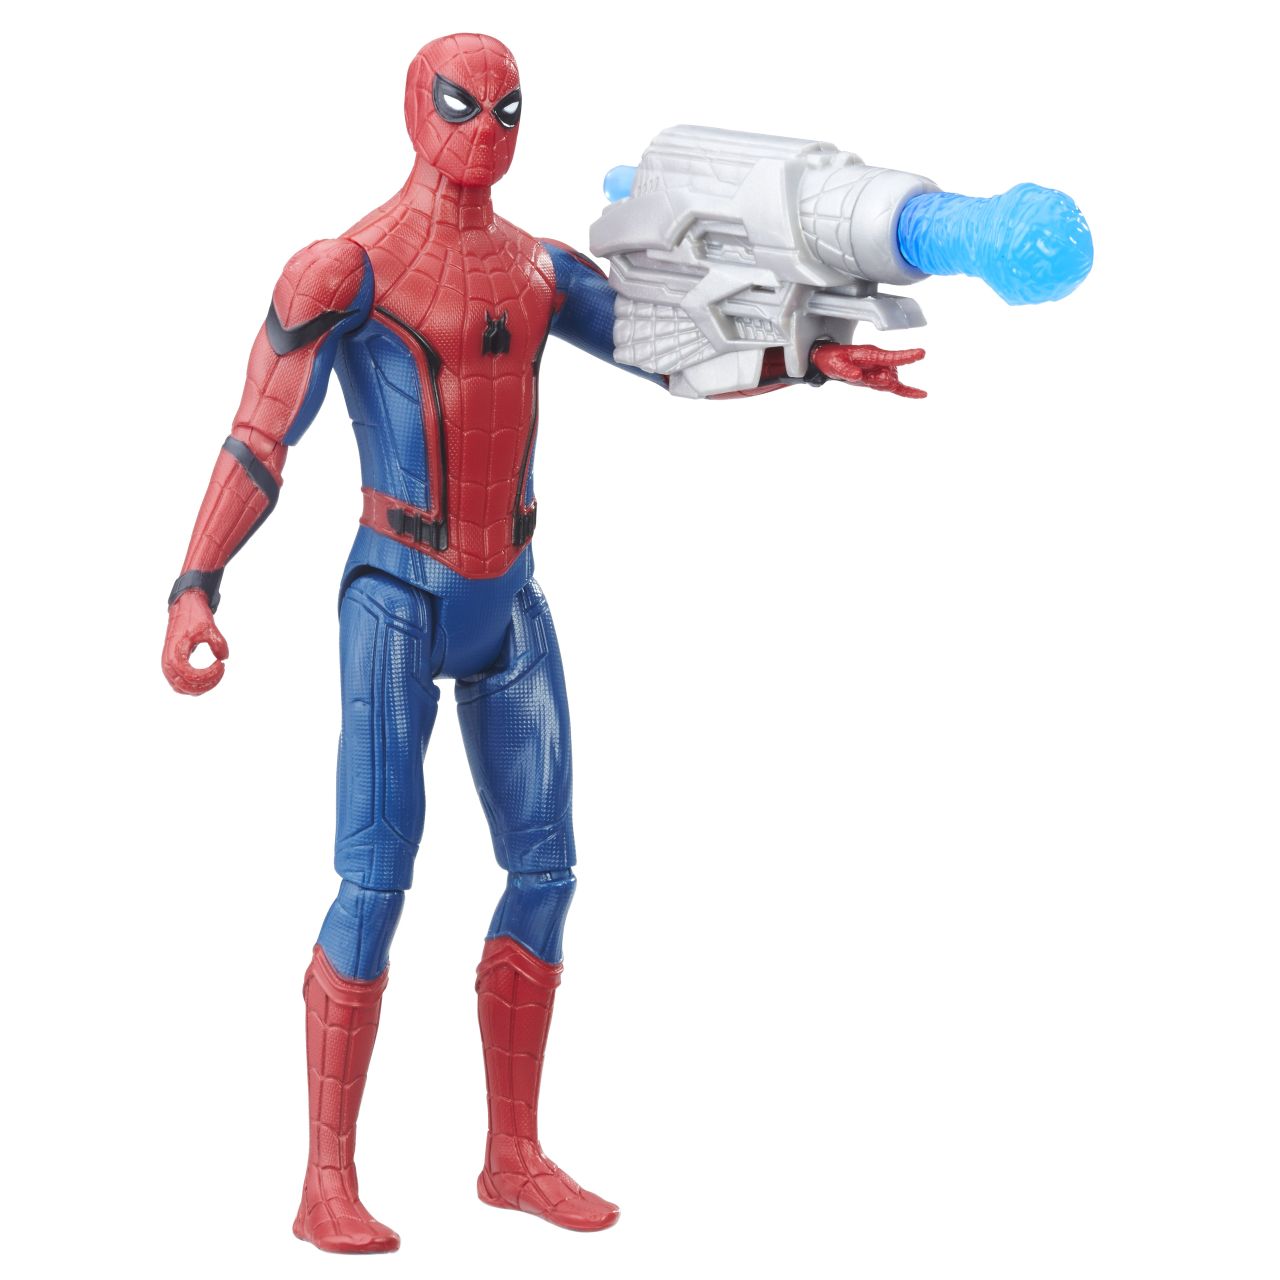 Spider-Man: Homecoming Toys